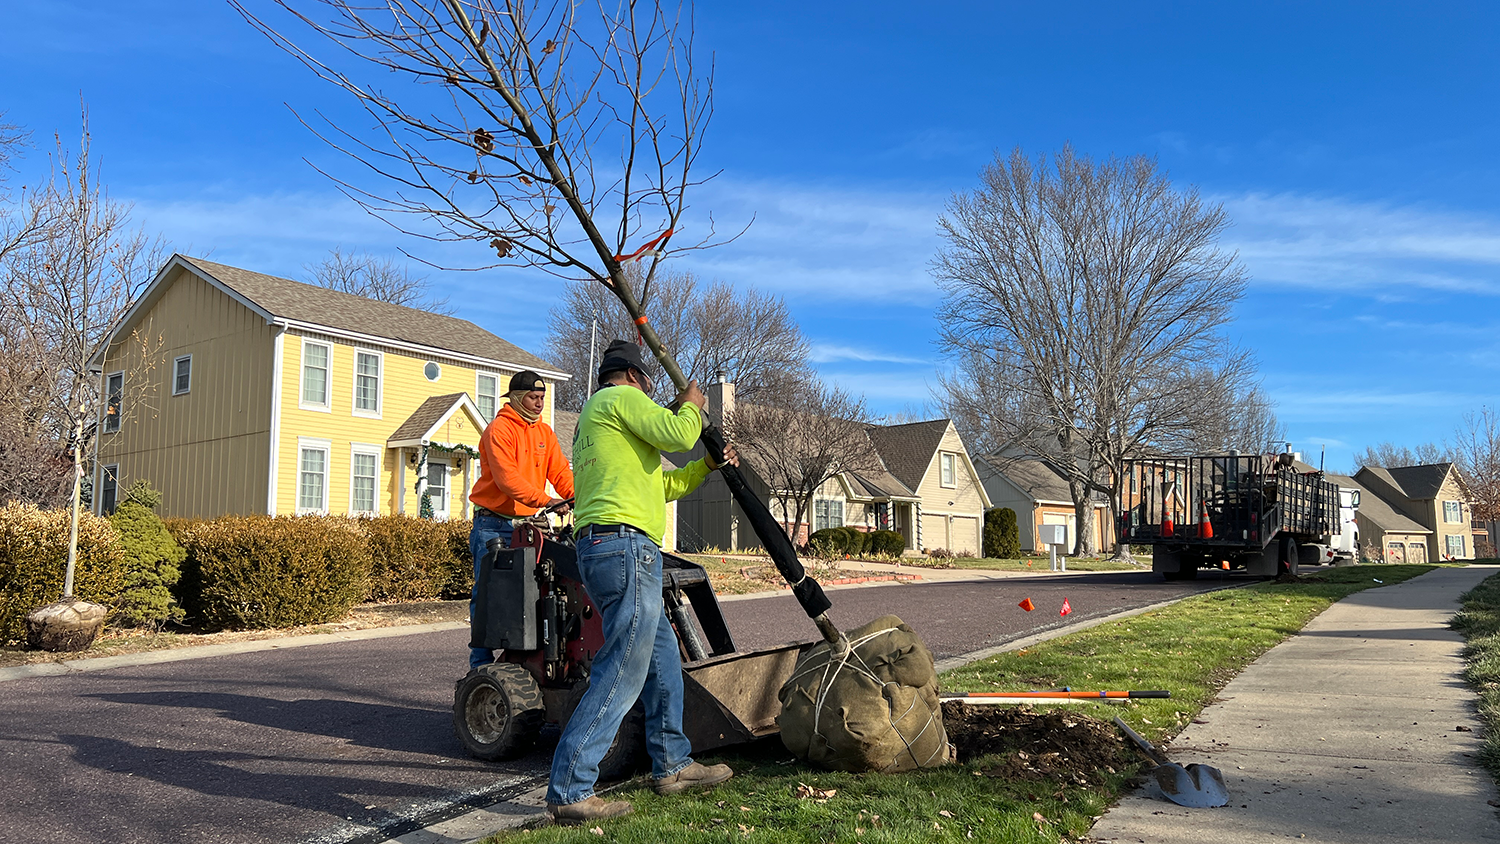 Two workers plant a new street tree along a residential road.